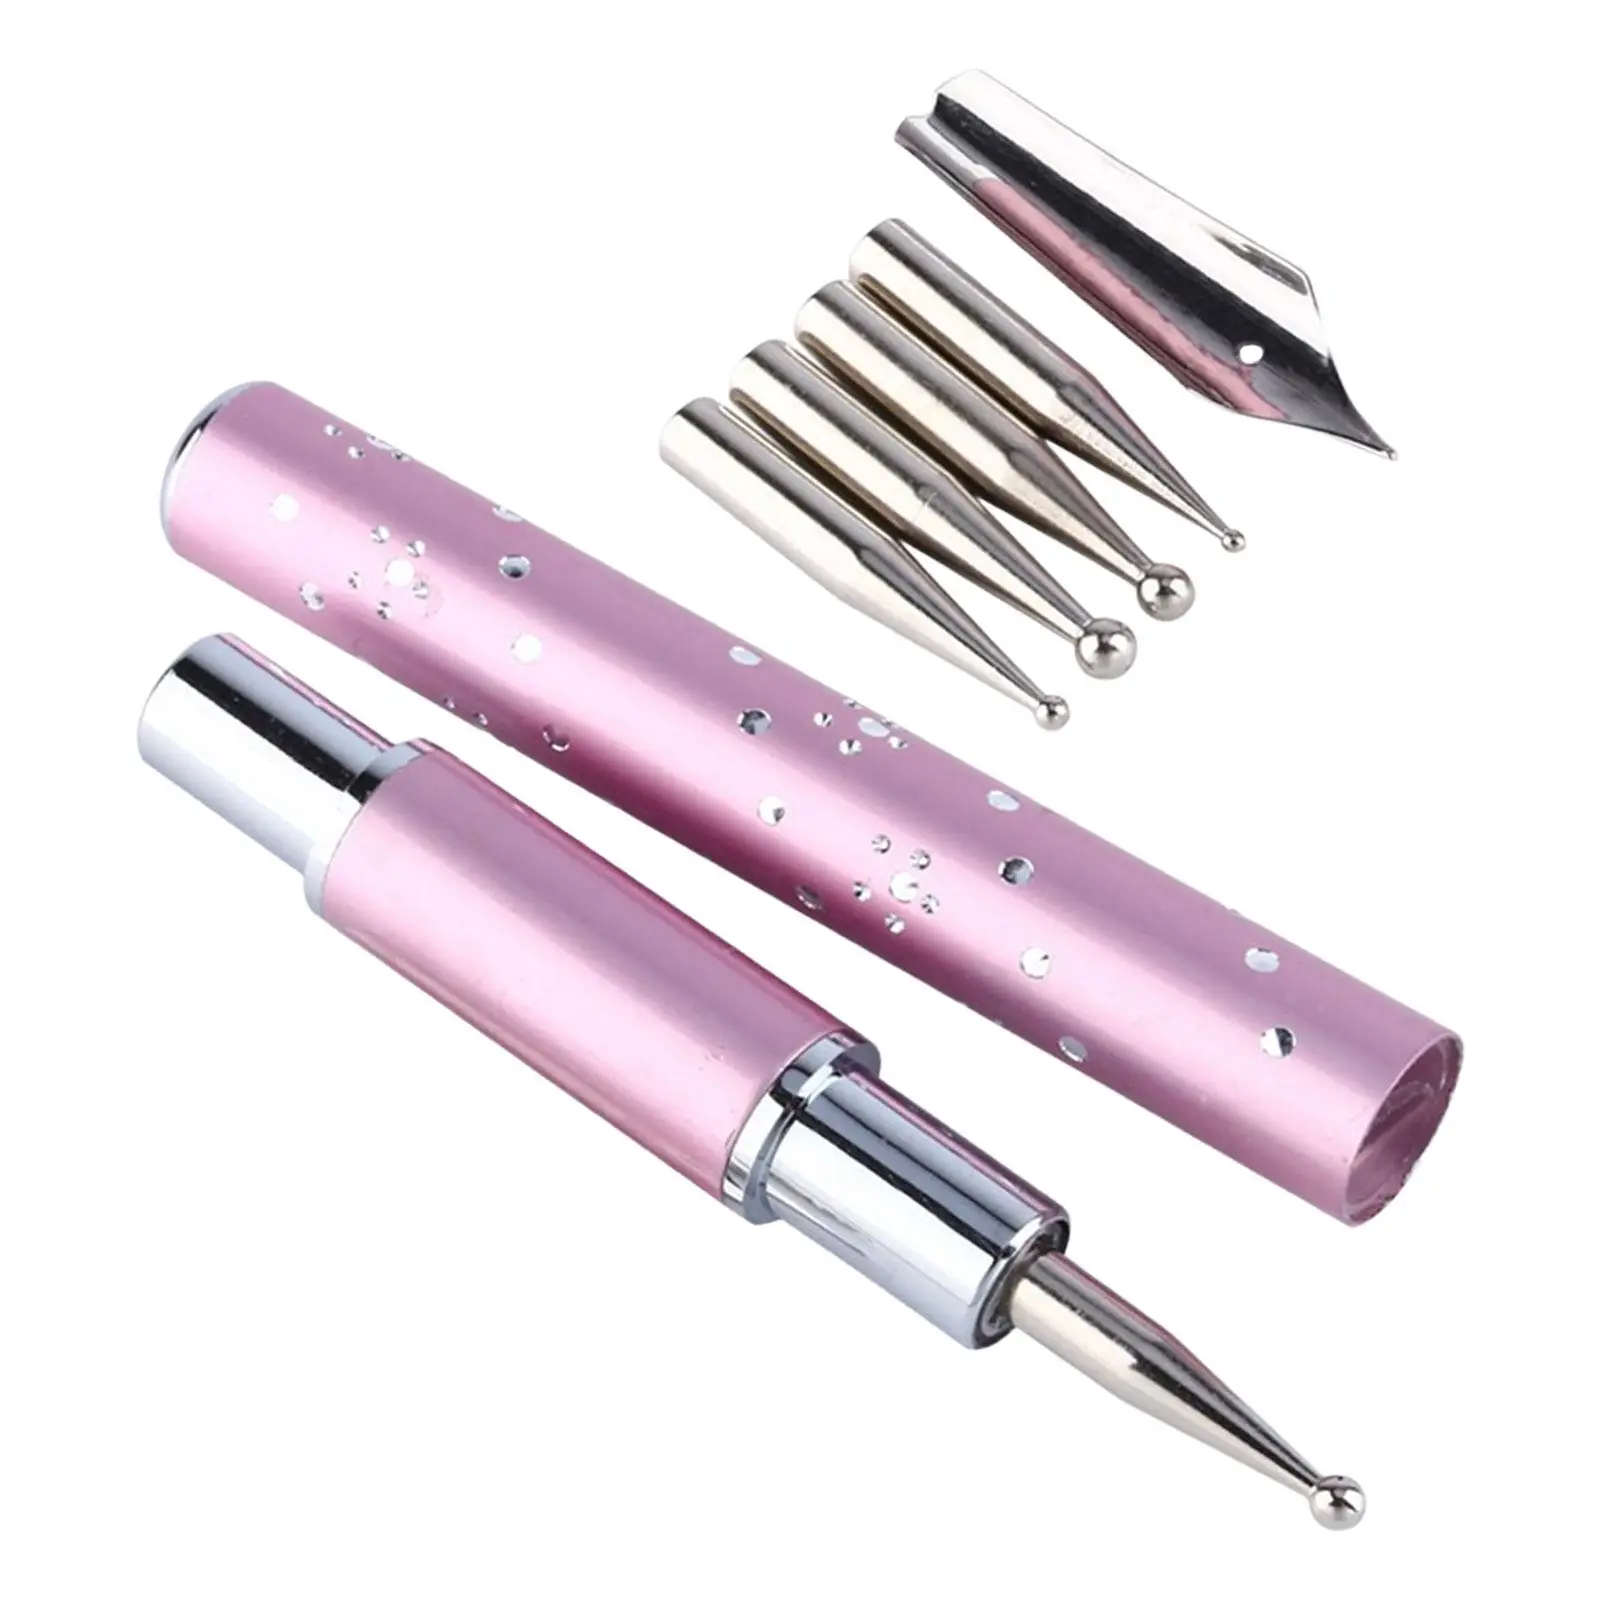 Nail Art Fountain Pen Brush Stainless Steel with 5 Replacement Heads Dotting Liner Tool Nail Art Painting Pen for Salon Home